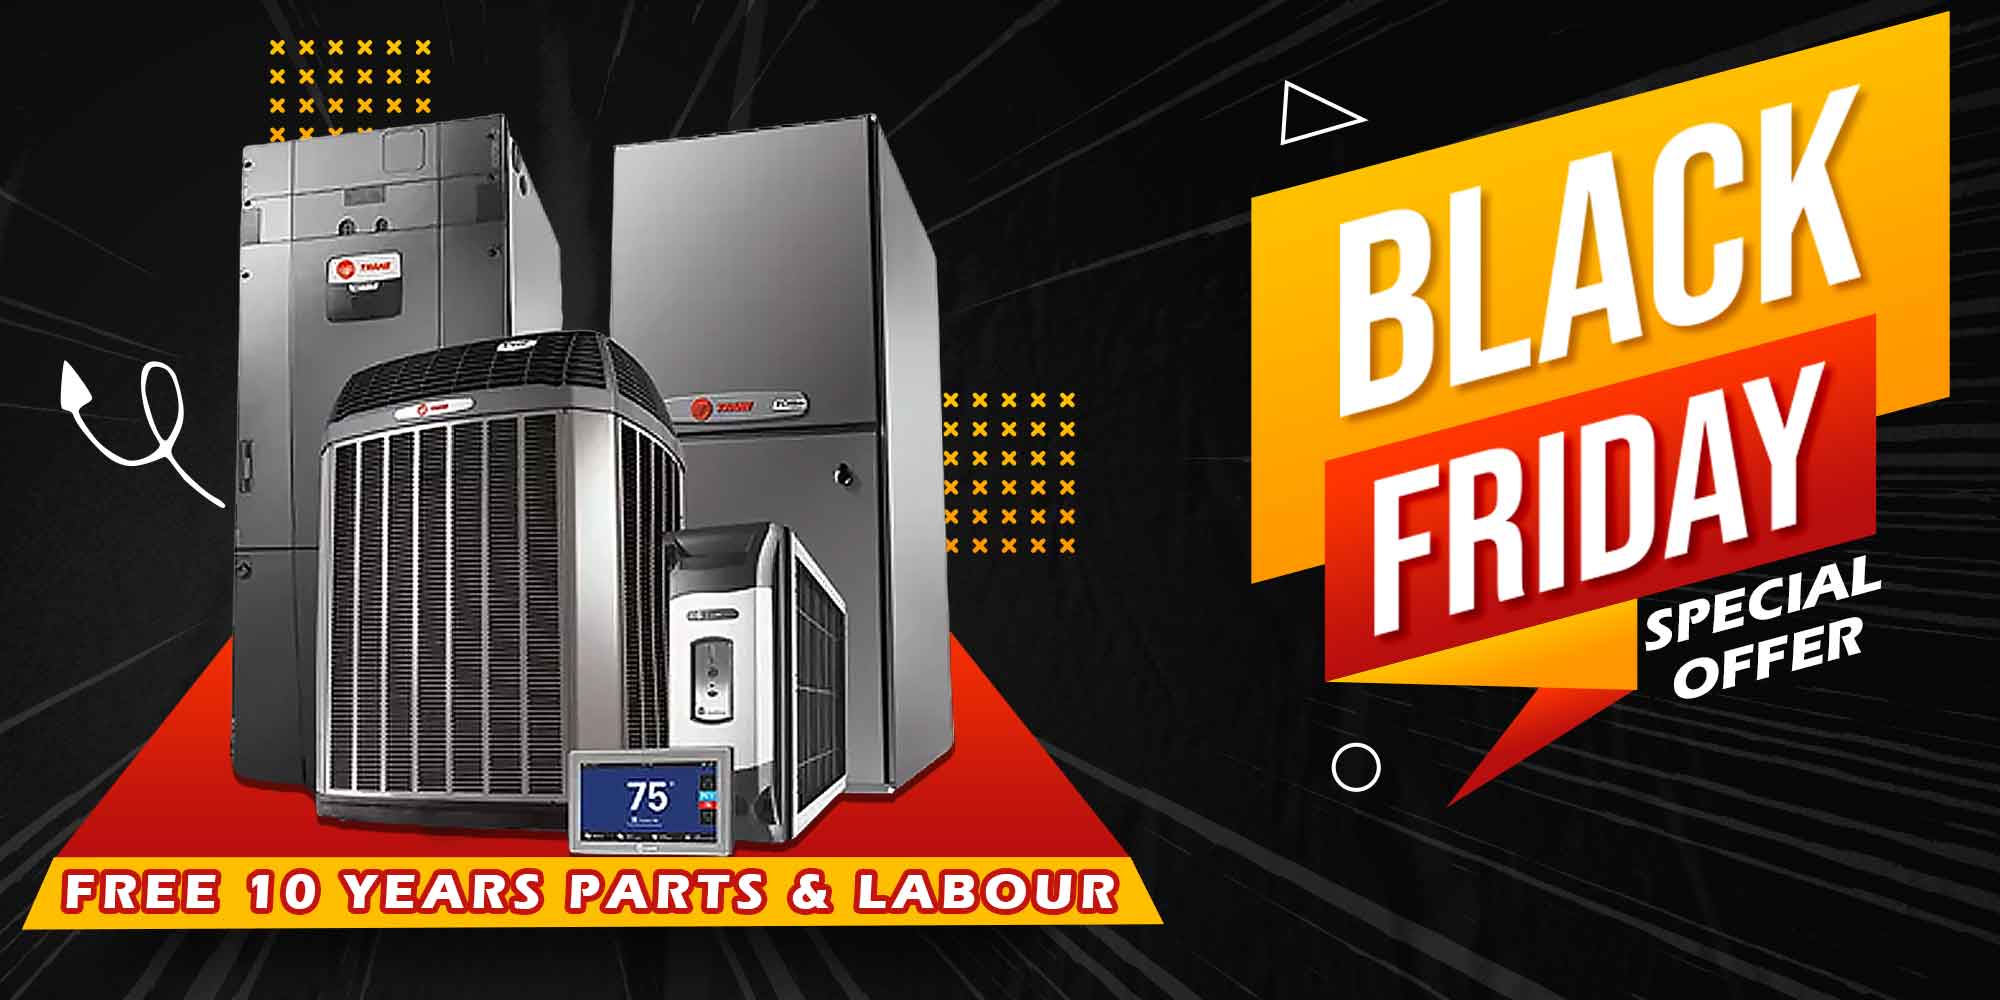 Black Friday Deal by Cambridge Heating and Cooling